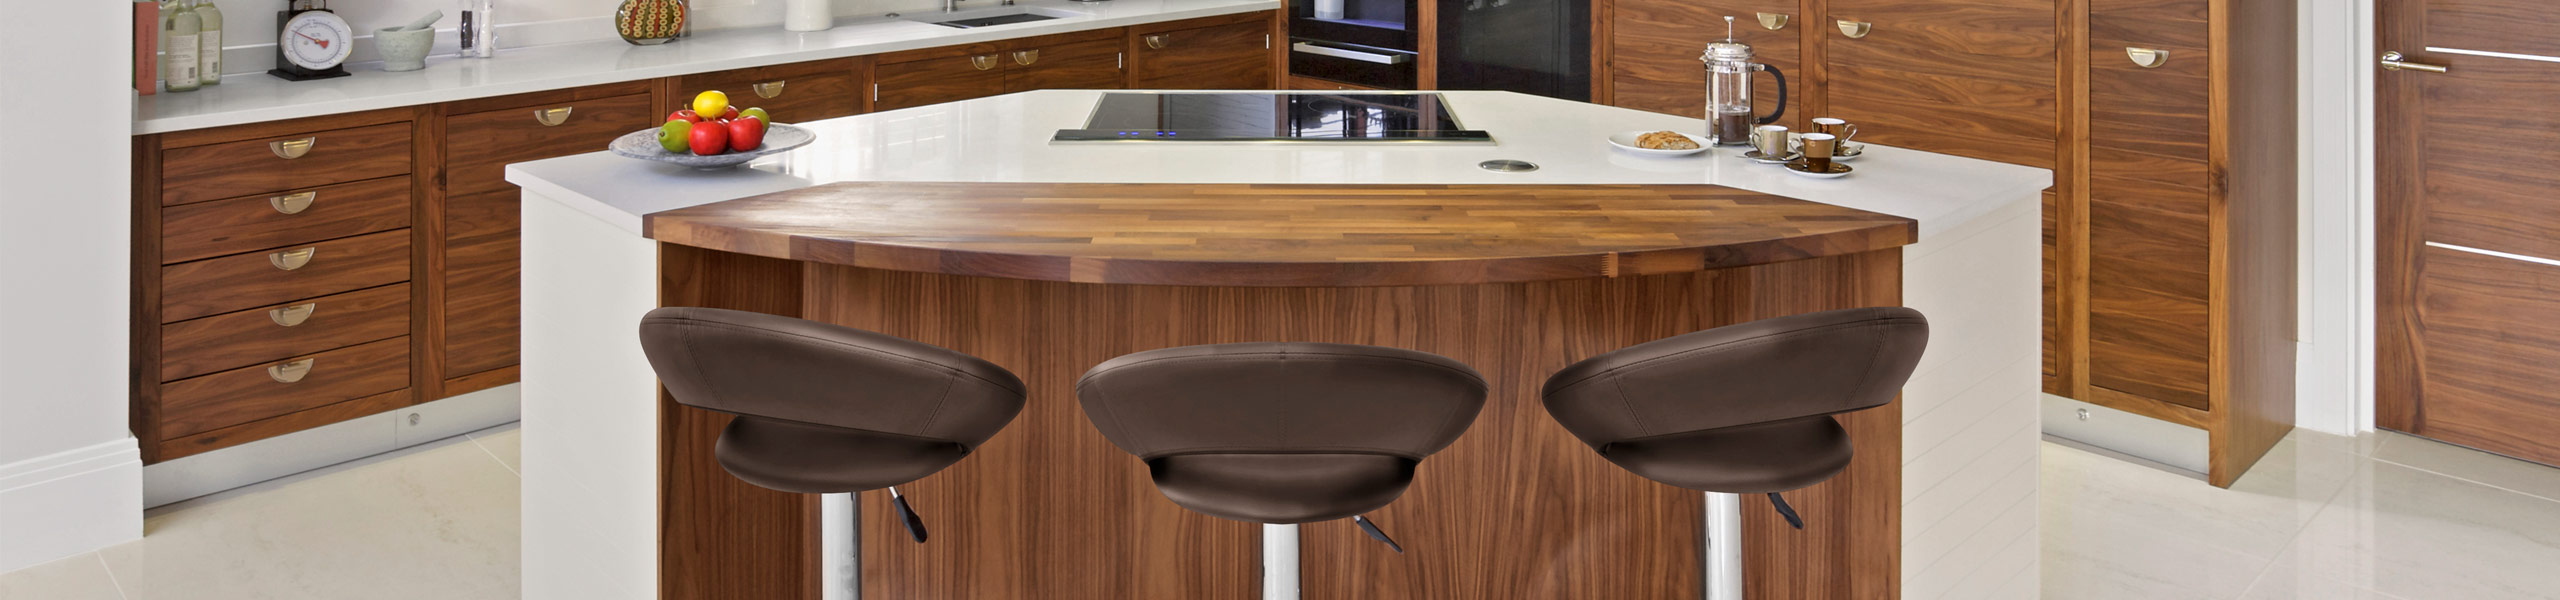 Padded Crescent Bar Stool Brown Video Banner